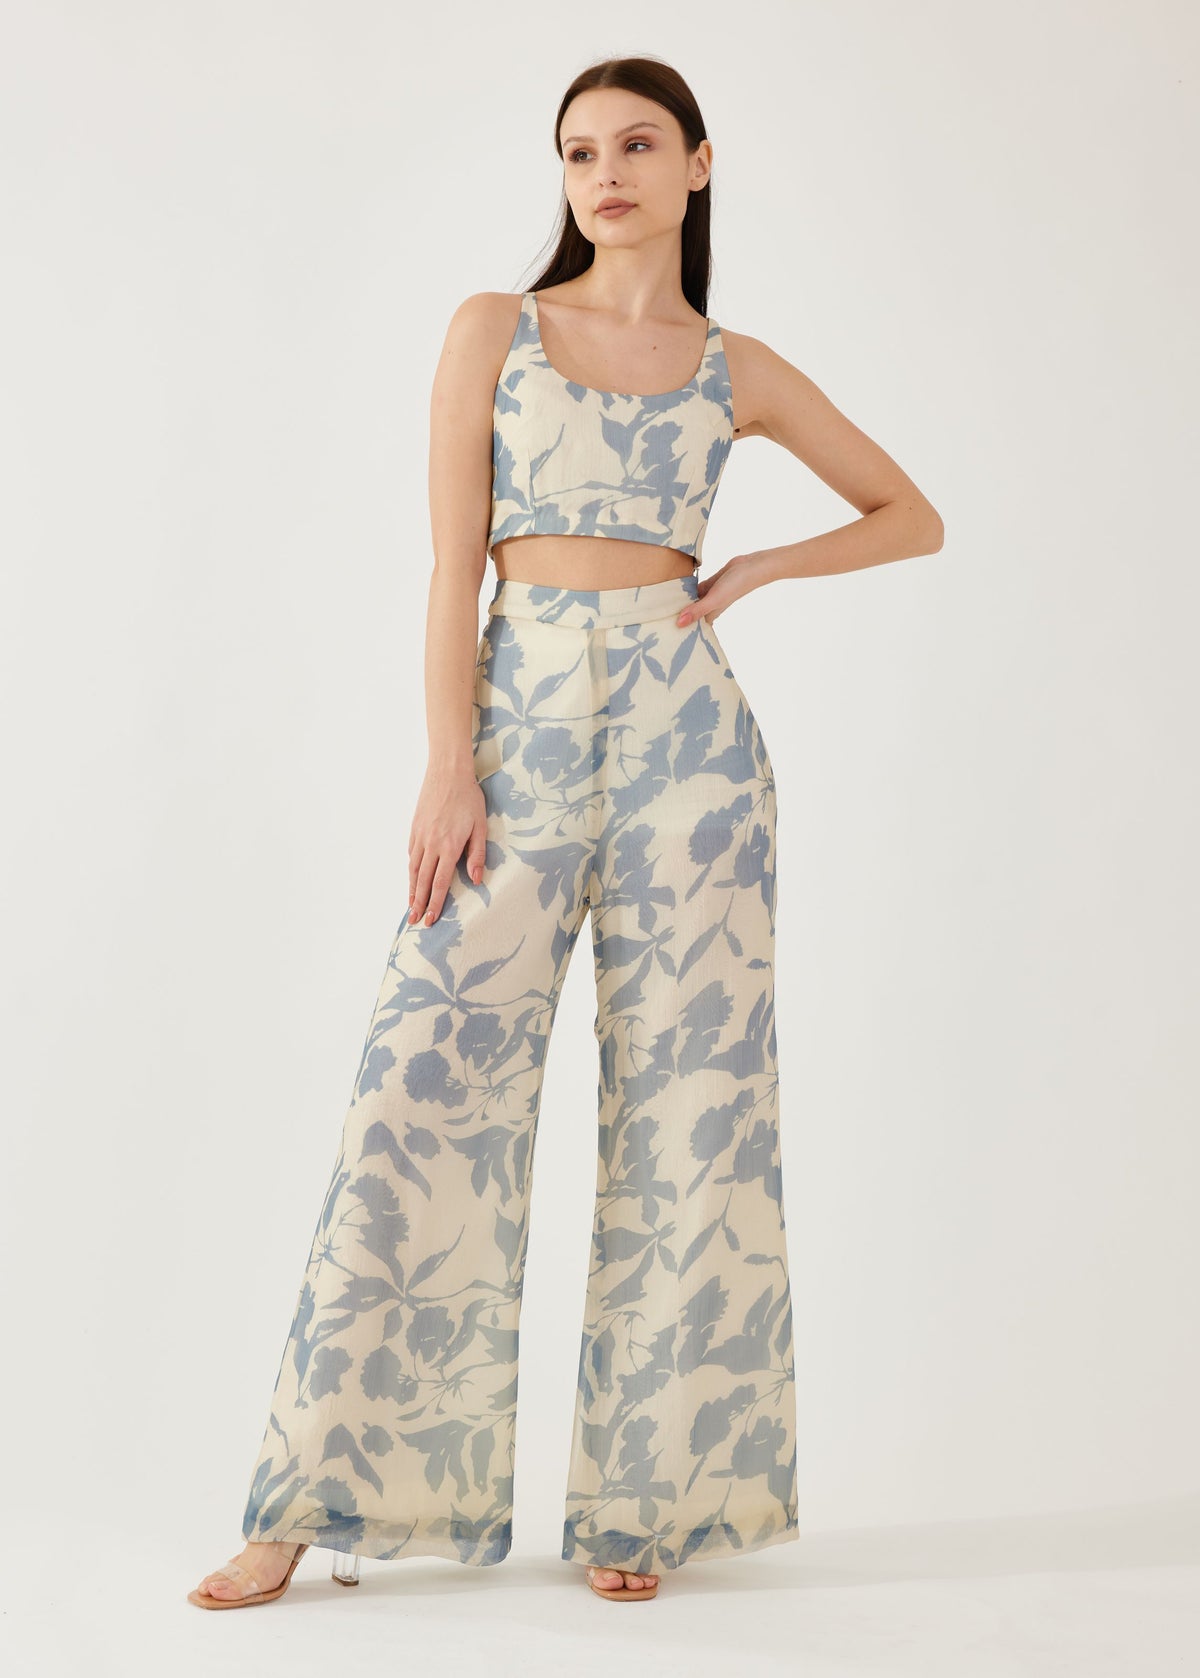 CREAM AND BLUE FLORAL PANTS